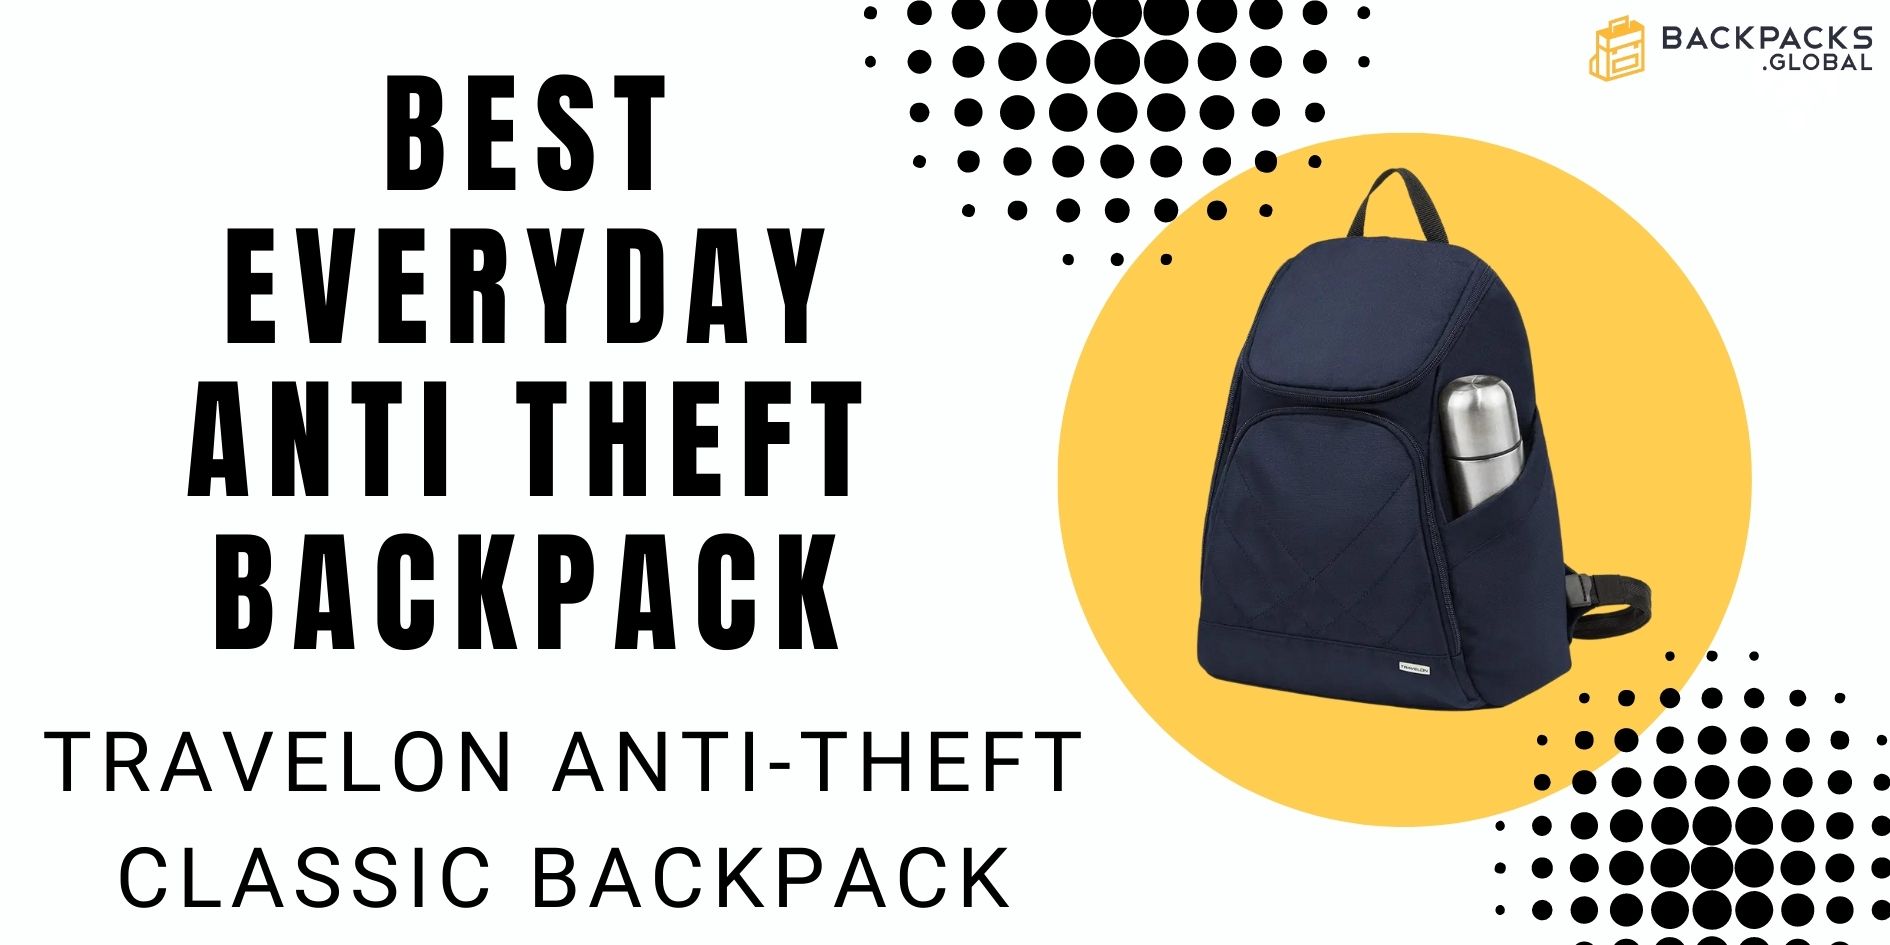 What Is the Best Anti Theft Backpack? - Backpacks Global